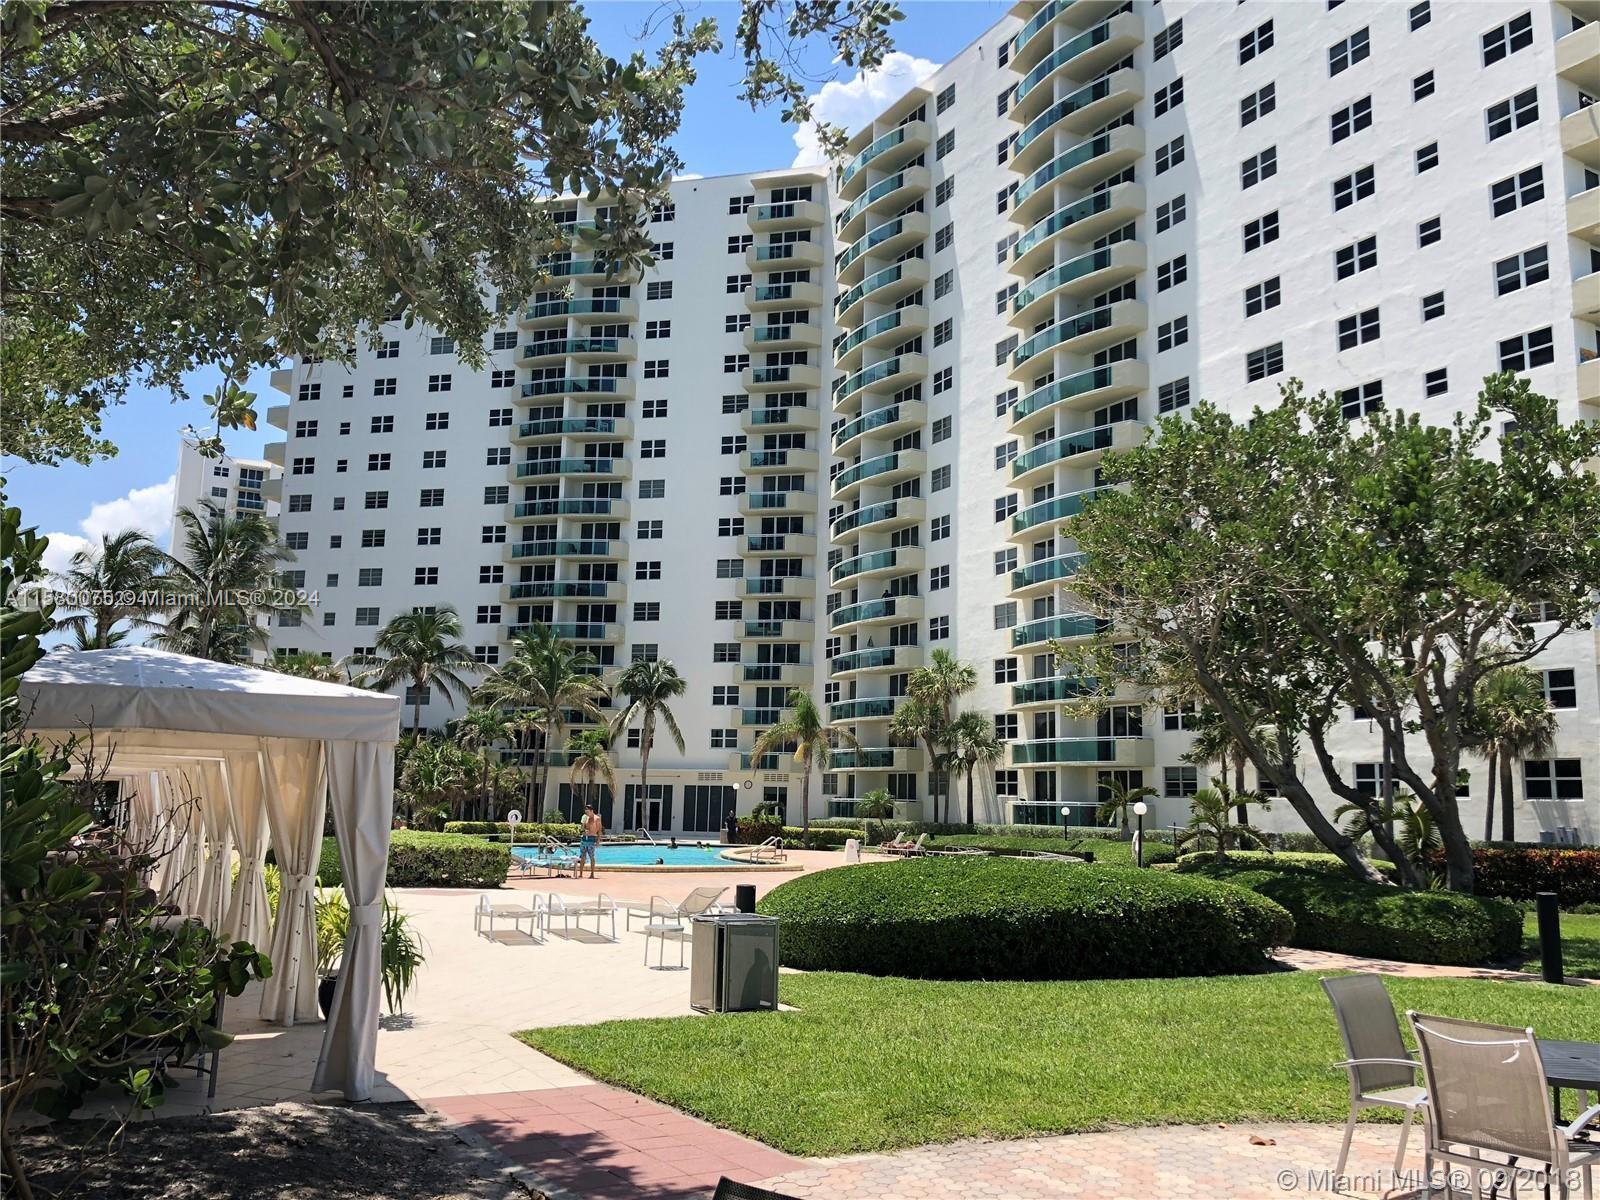 Photo of 3000 S Ocean Dr #1220 in Hollywood, FL